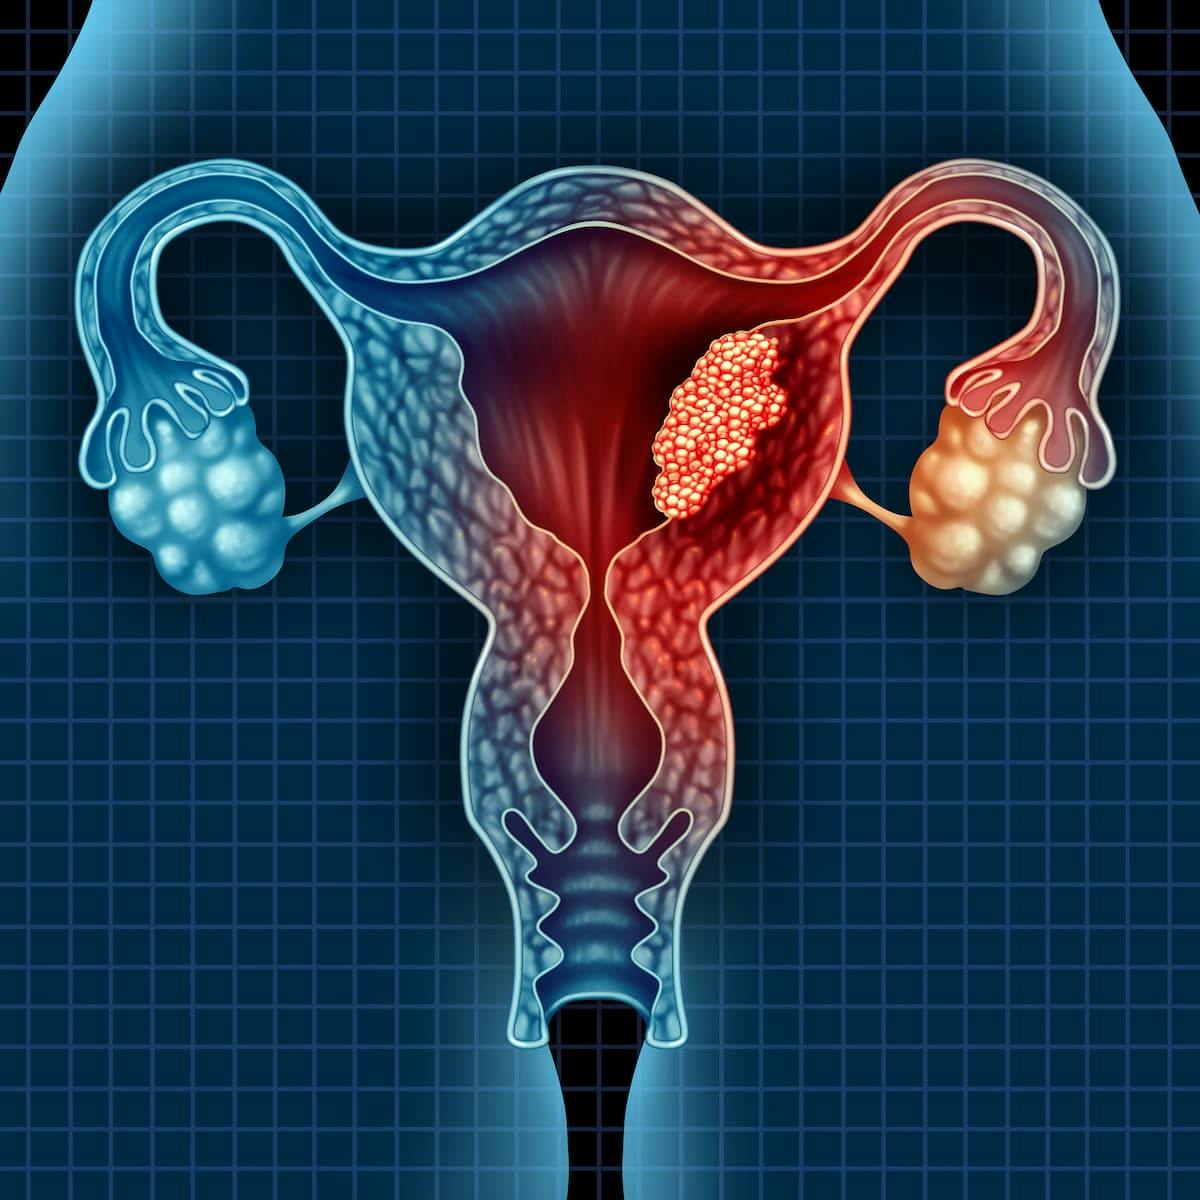 “Today’s European Commission approval is welcomed news, as I believe it will define a new standard of care for certain patients with advanced or recurrent endometrial cancer in the [European Union],” according toMansoor Raza Mirza, MD.